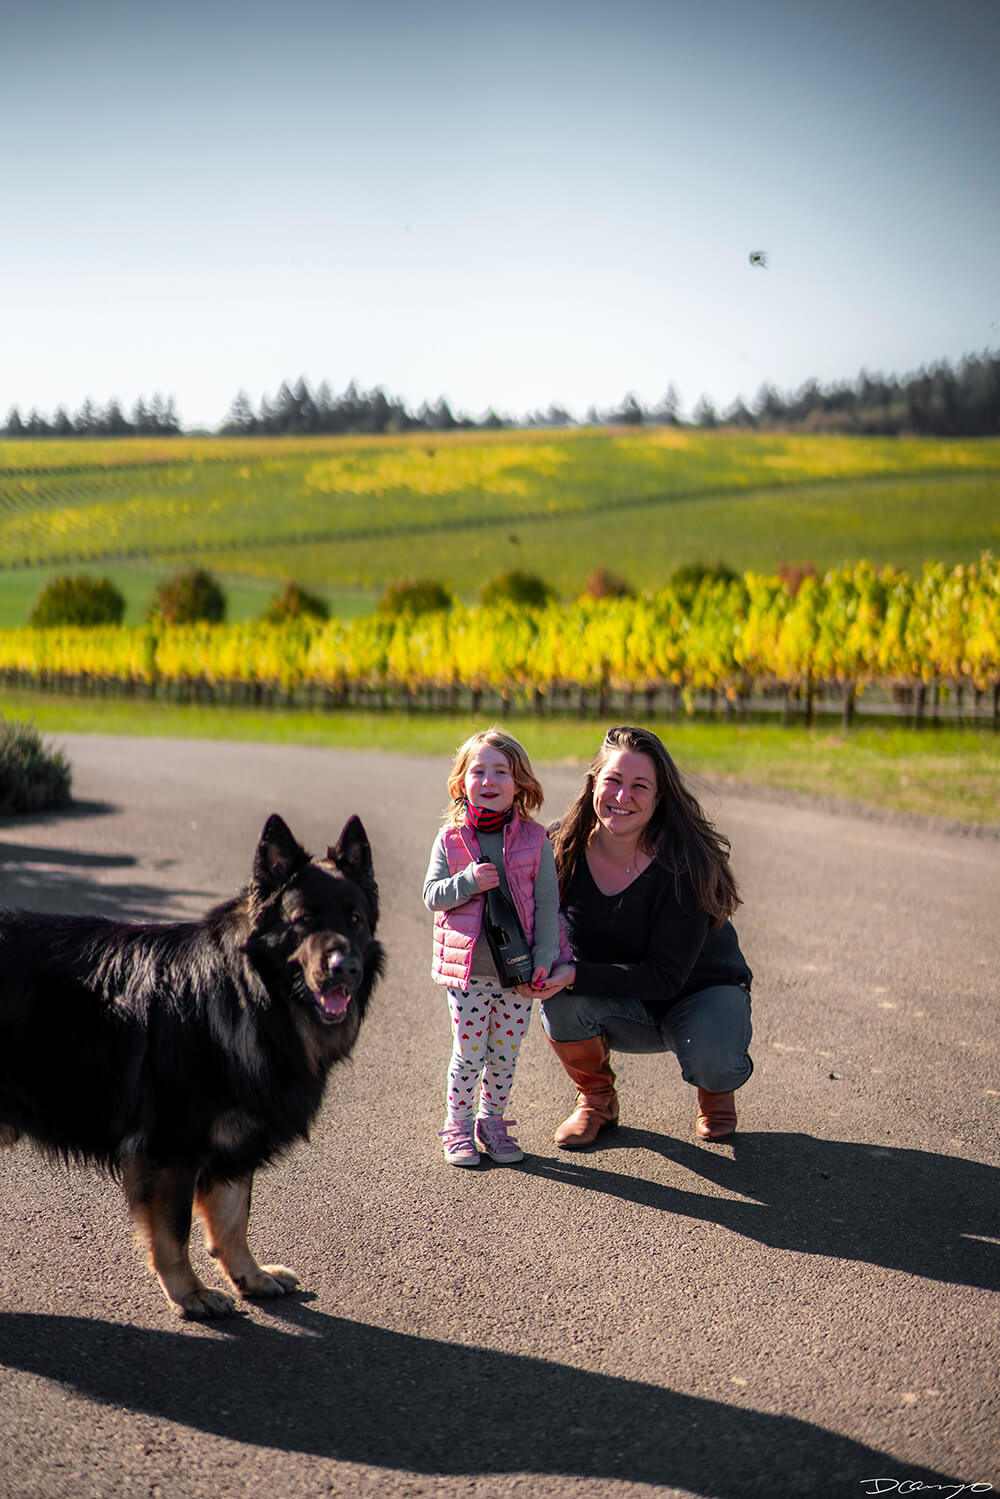 Photos with Communique Wines in McMinville, Oregon, in the Fall of 2020.